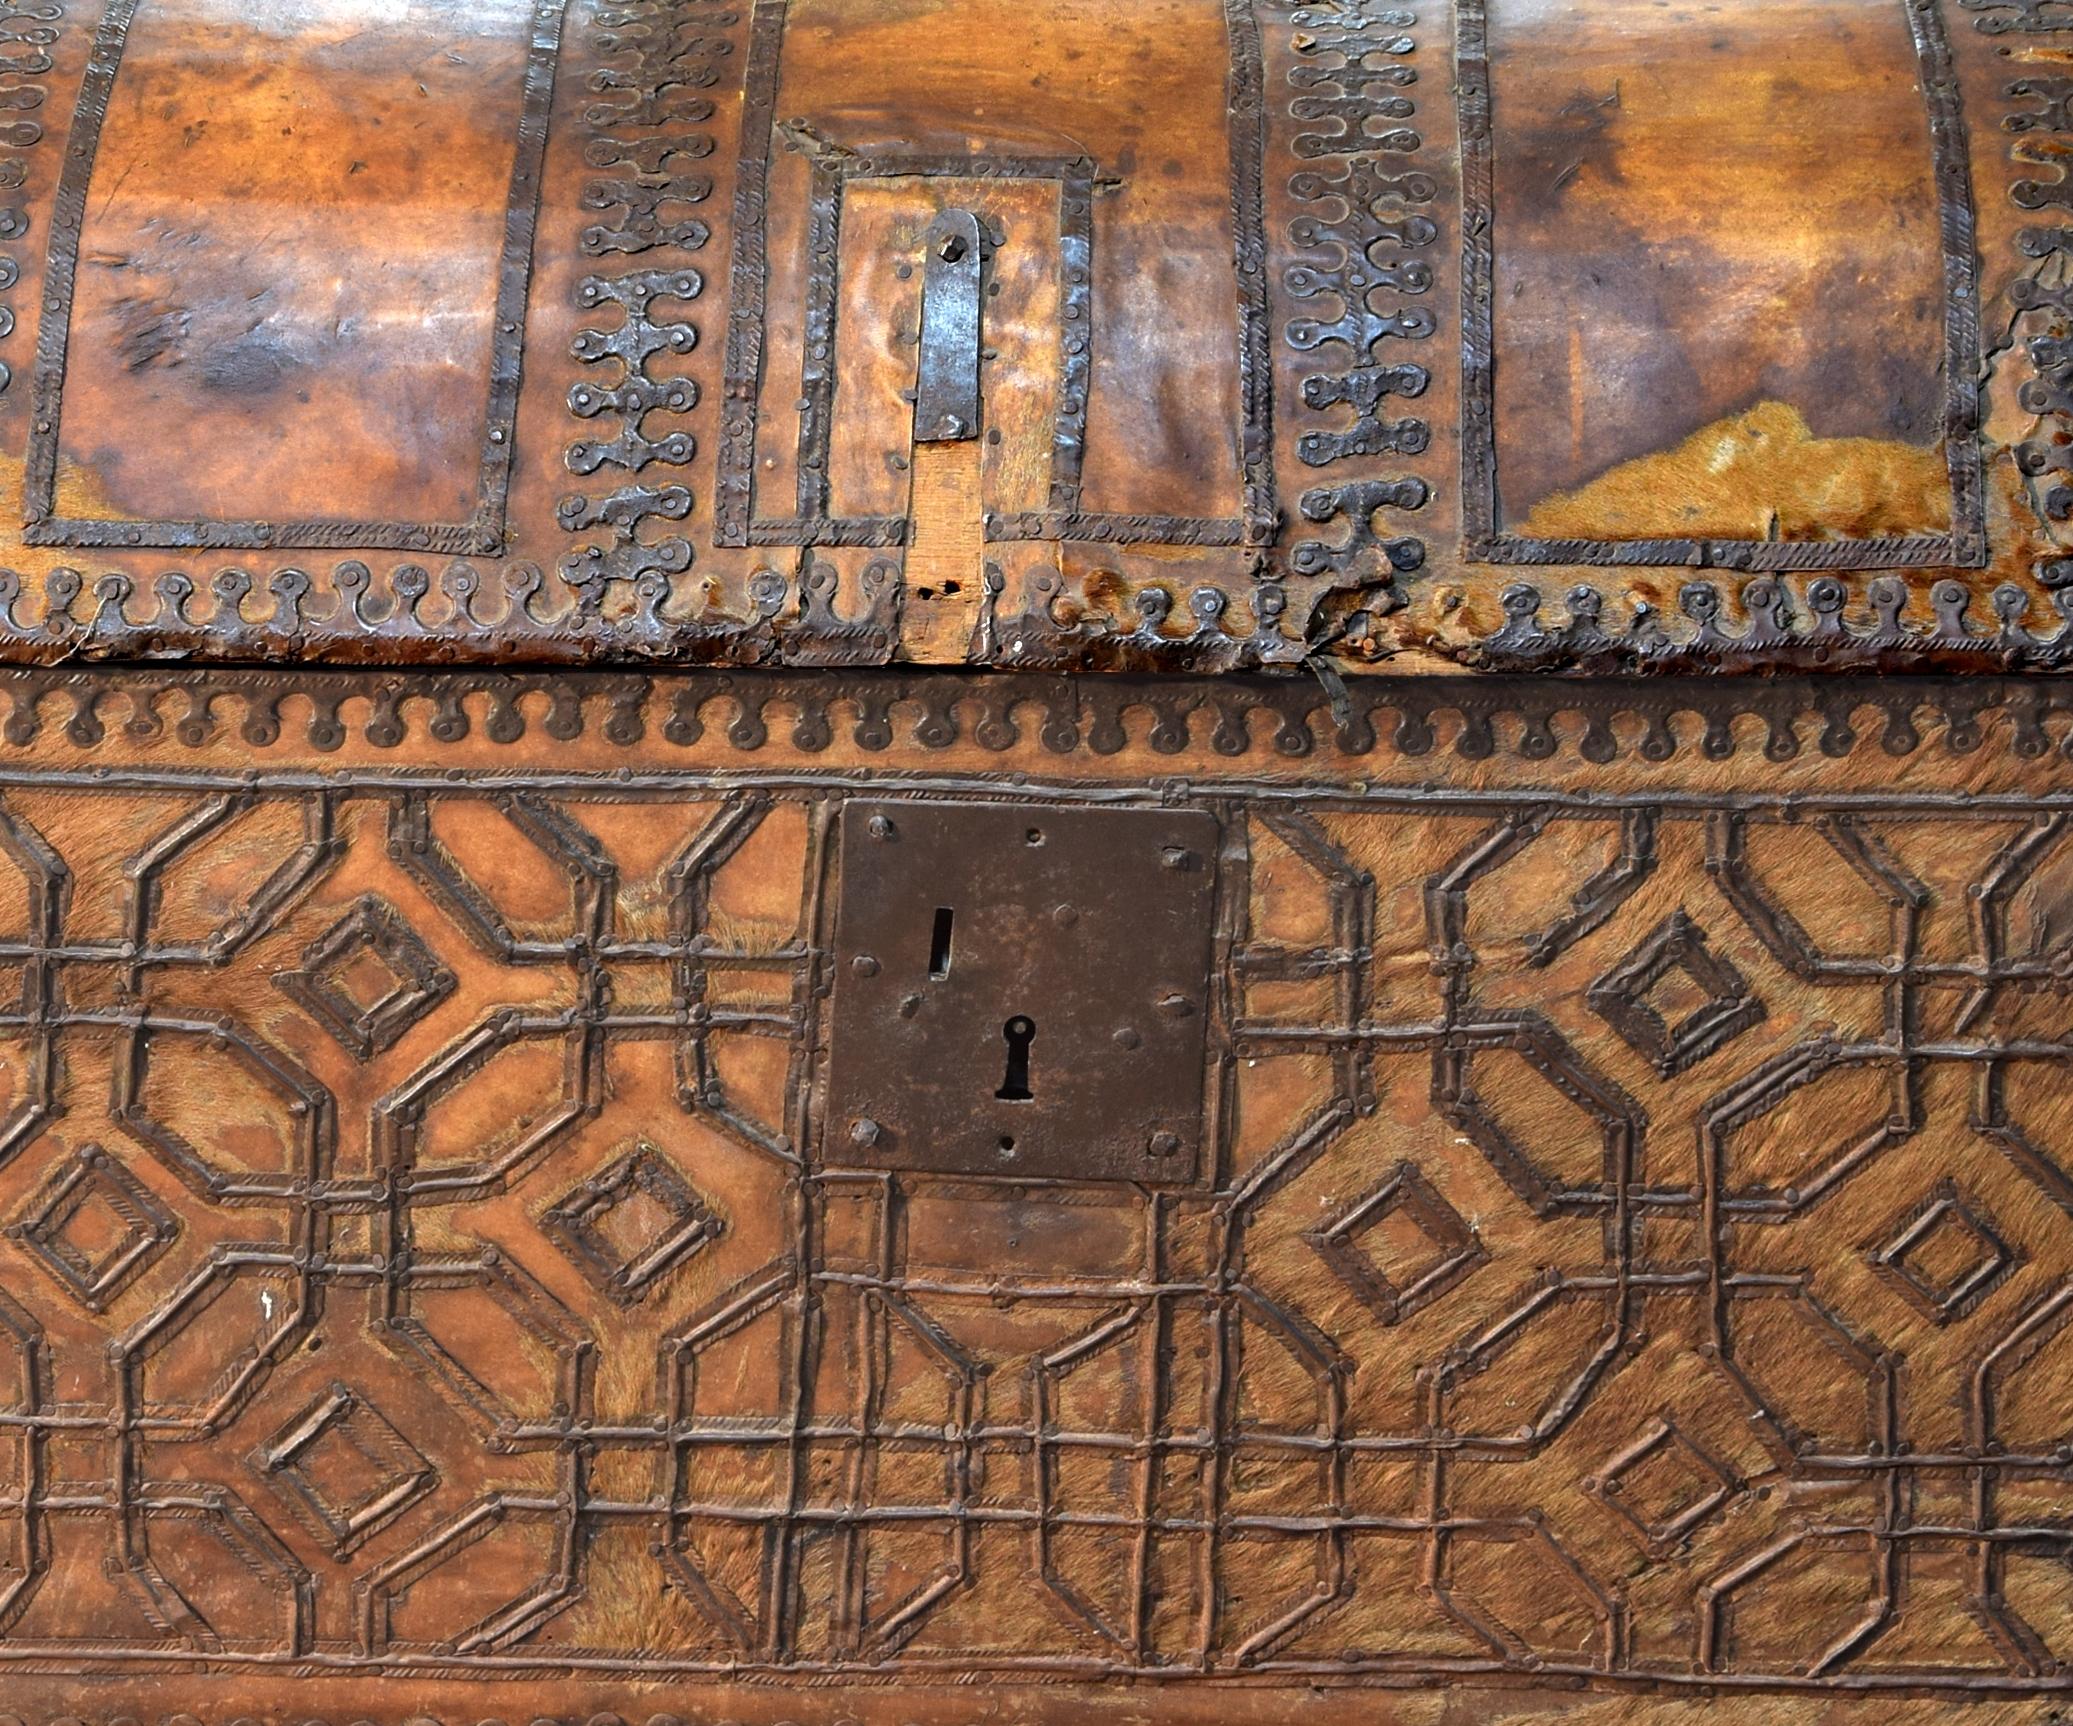 Other Chest with Geometric Design, Leather, Iron, Spain, circa 1500